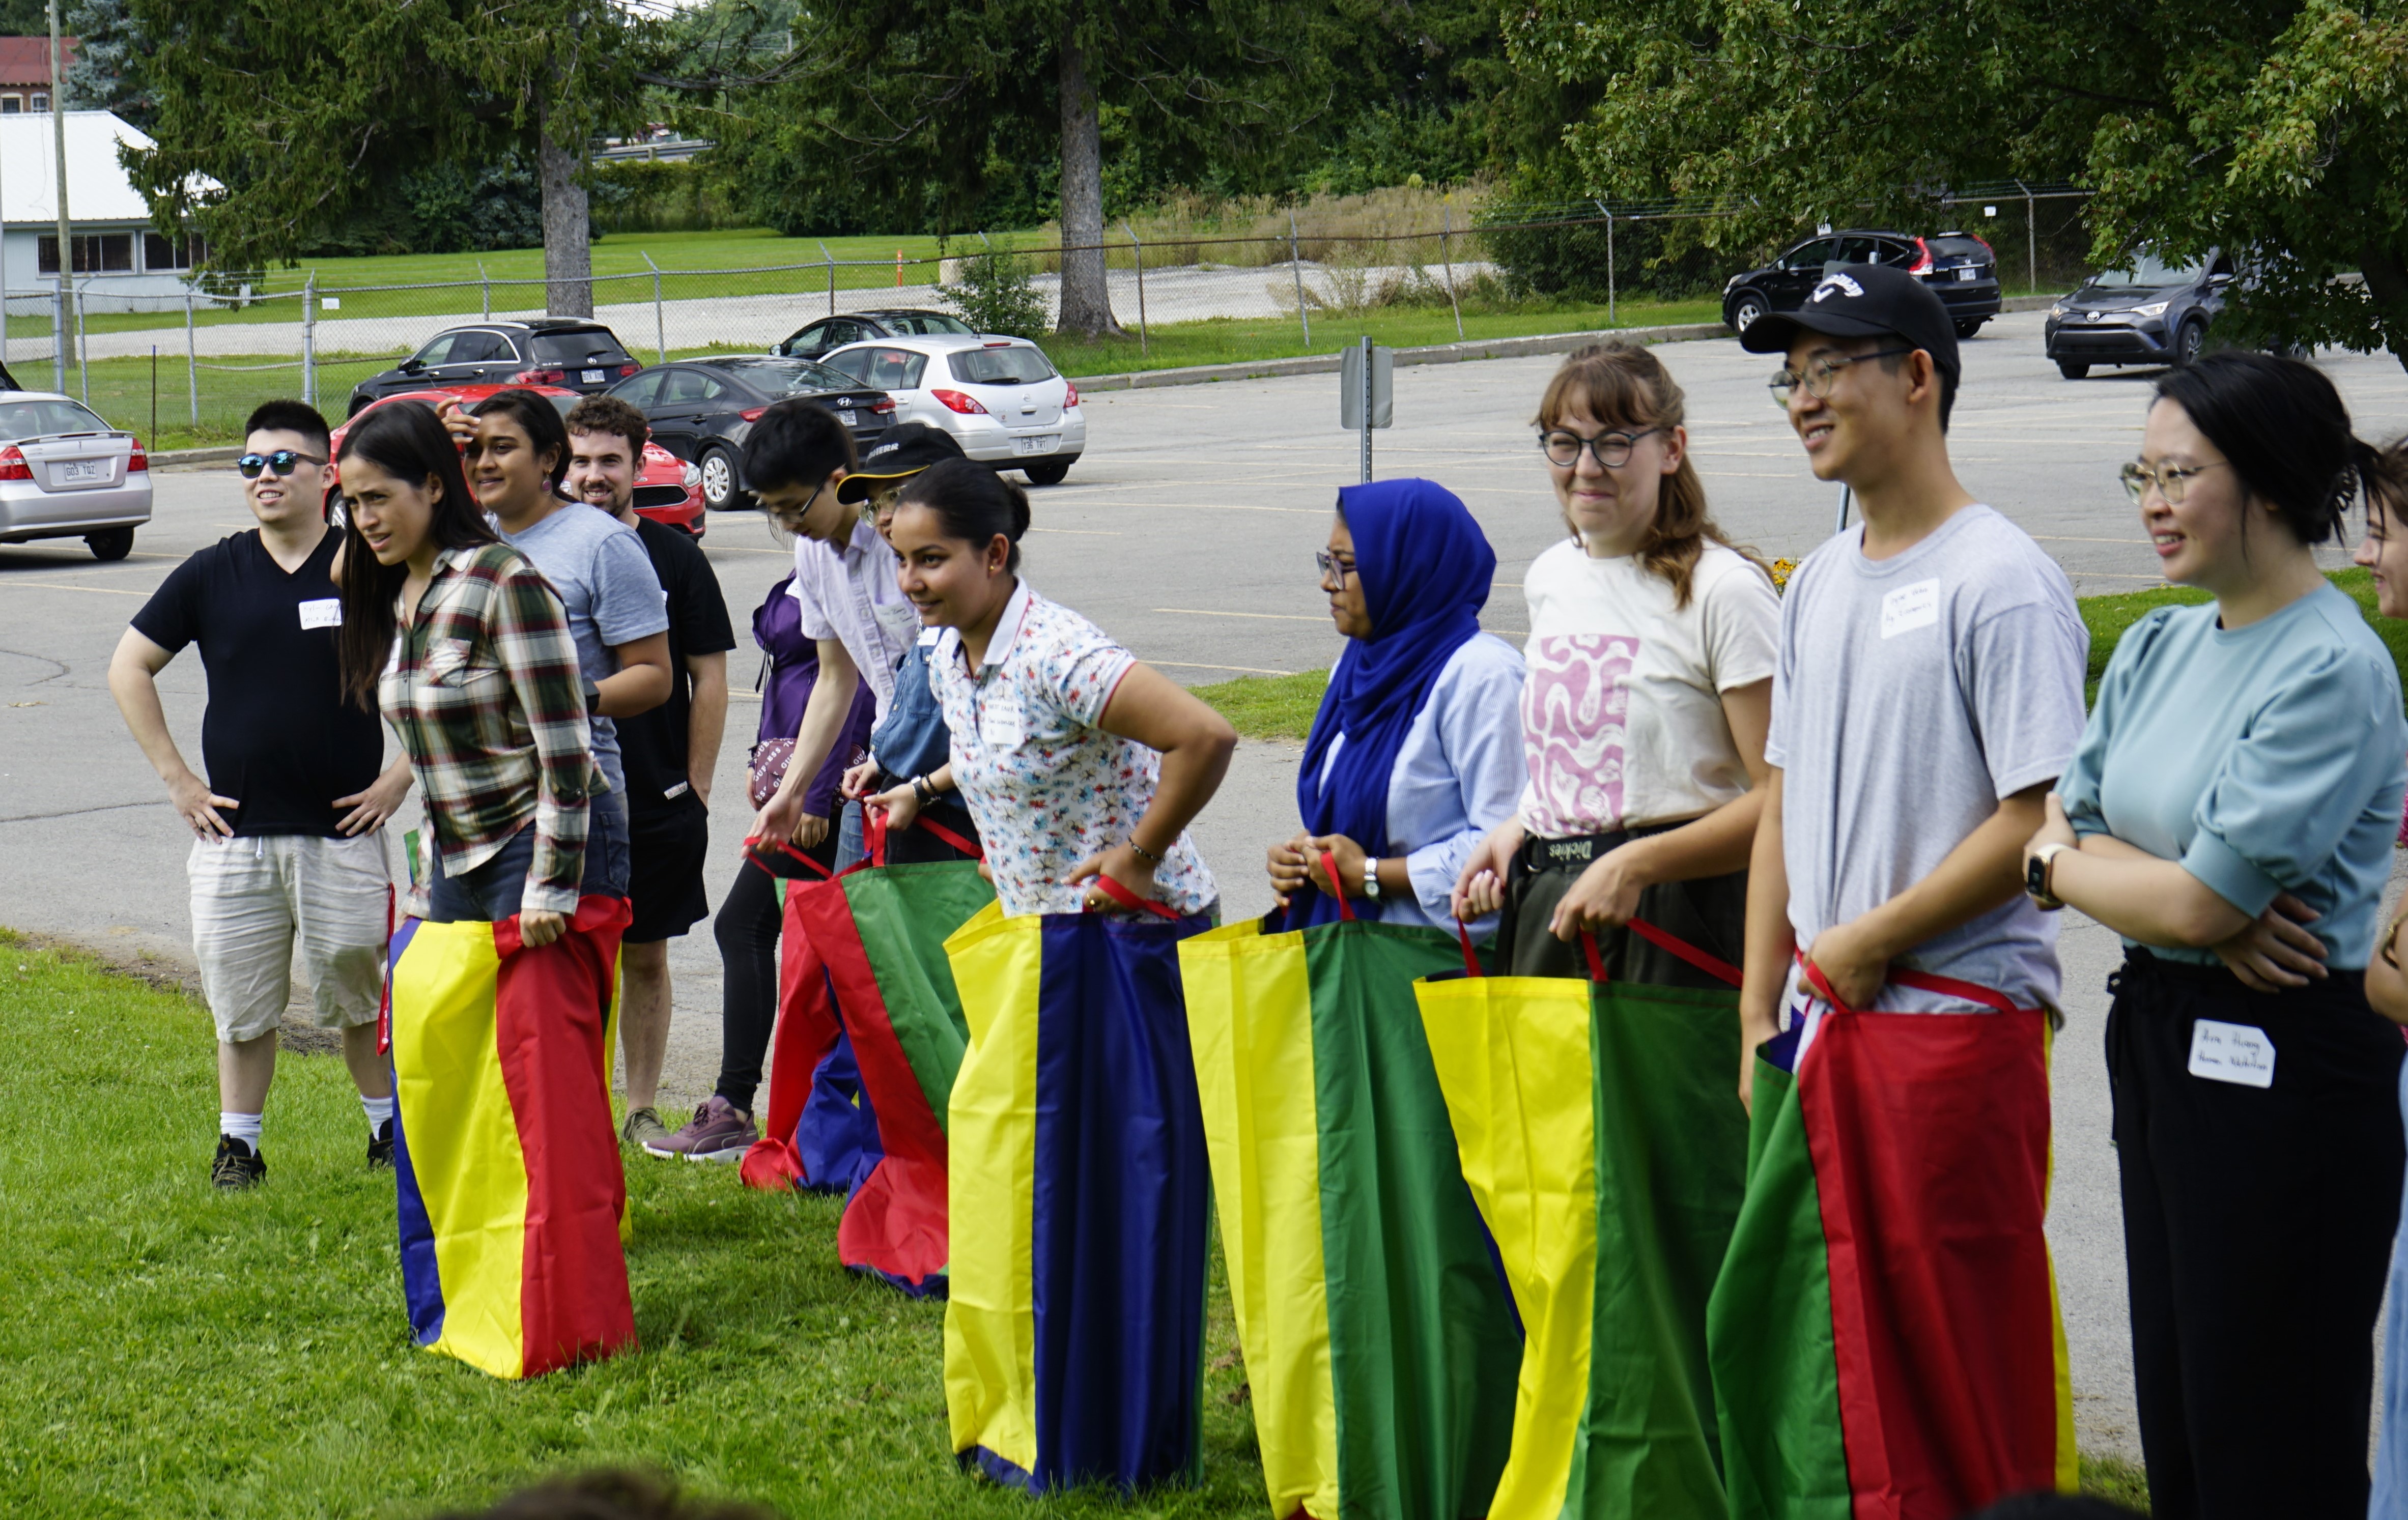 Students stand outside, readying themselves for a potato sack race